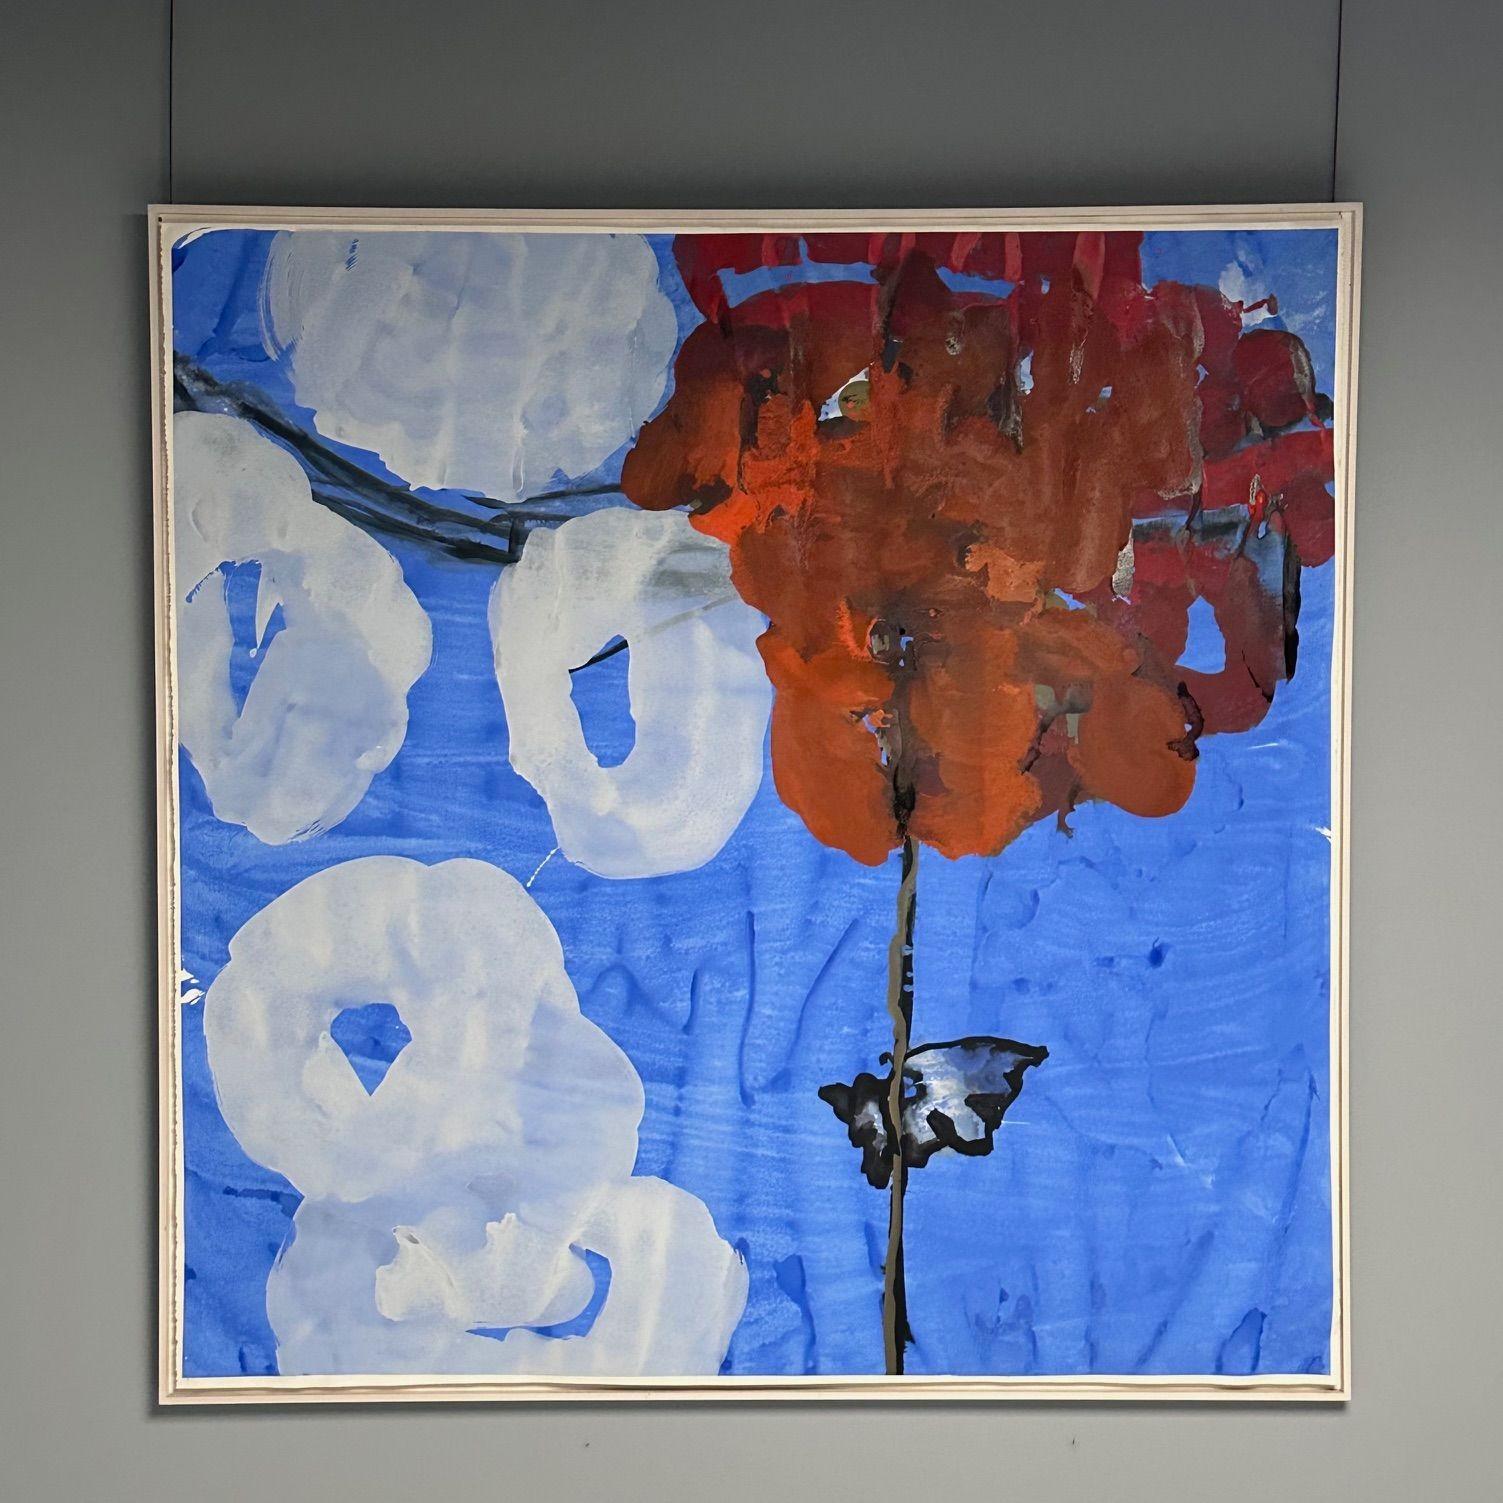 Contemporary, Large Modern Watercolor, Abstract Sky Painting, Blue, White Clouds, Red Flower

A large, abstract watercolor depicting a sky with clouds the Avon Products corporate collection. This work on paper has frayed edges and is suspended in